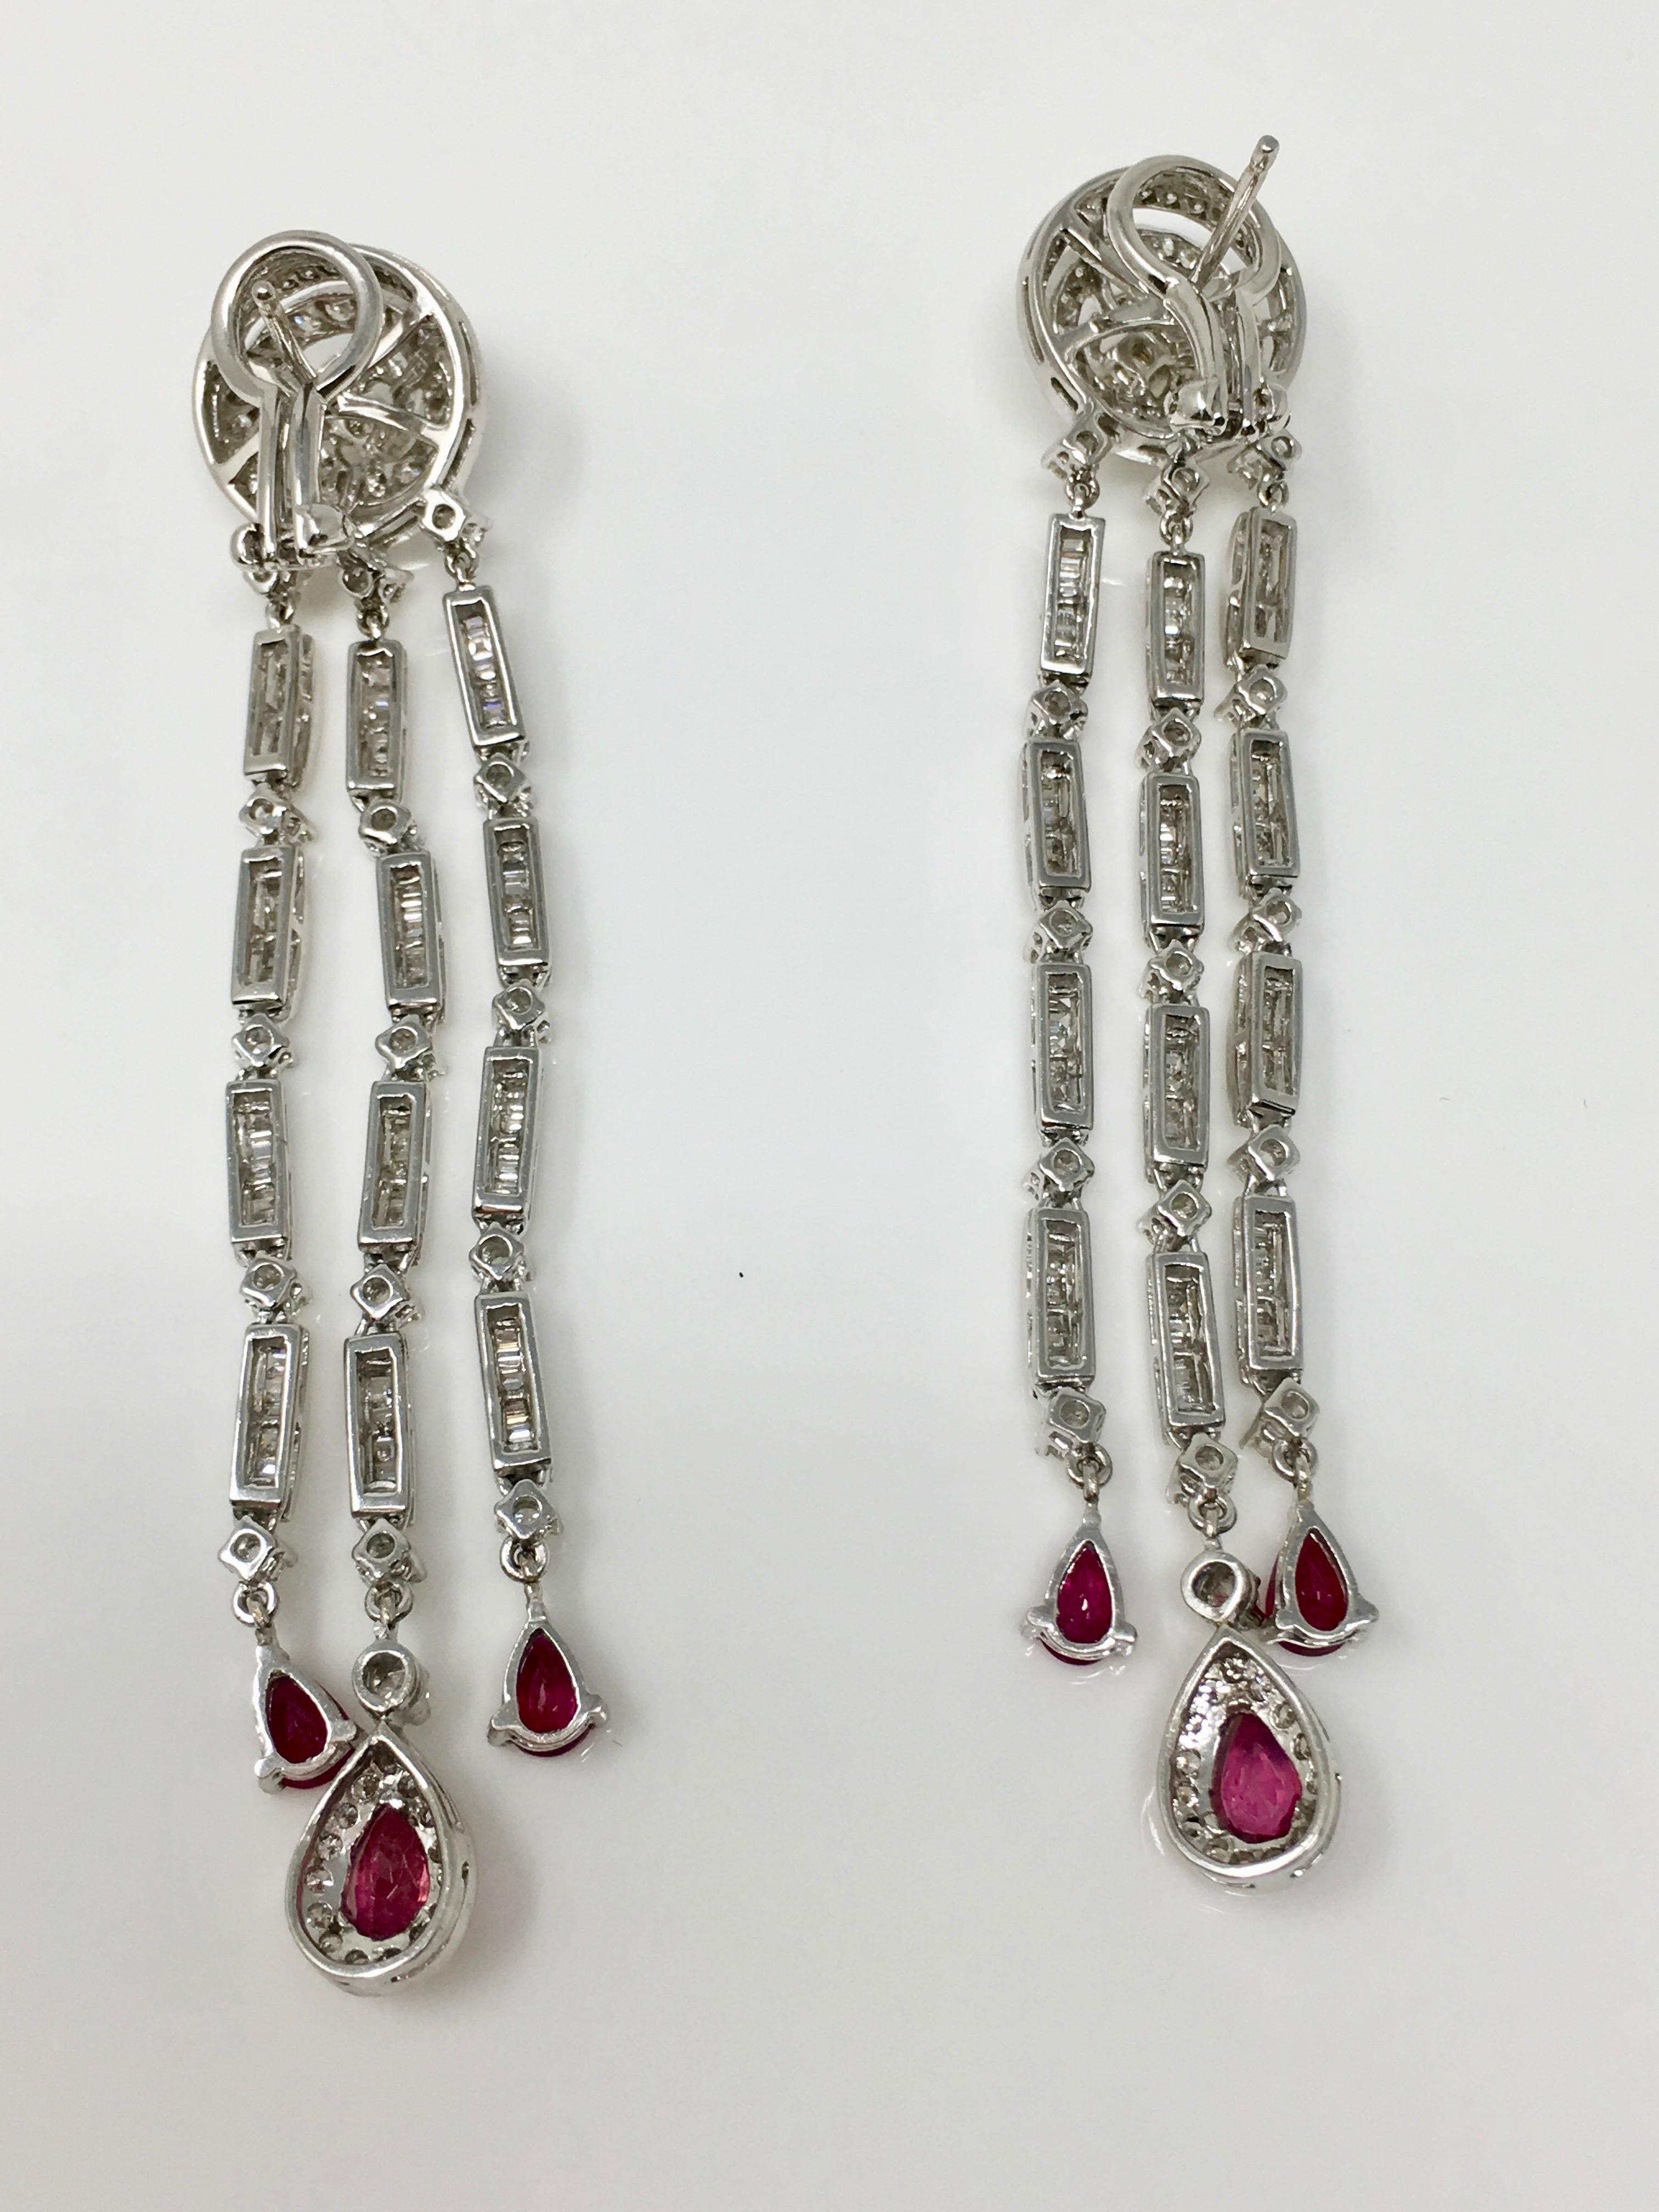 Rose Cut 6.03 Carat White Diamond And 3.40 Carat Red Ruby Chandelier Earrings In 18K Gold For Sale